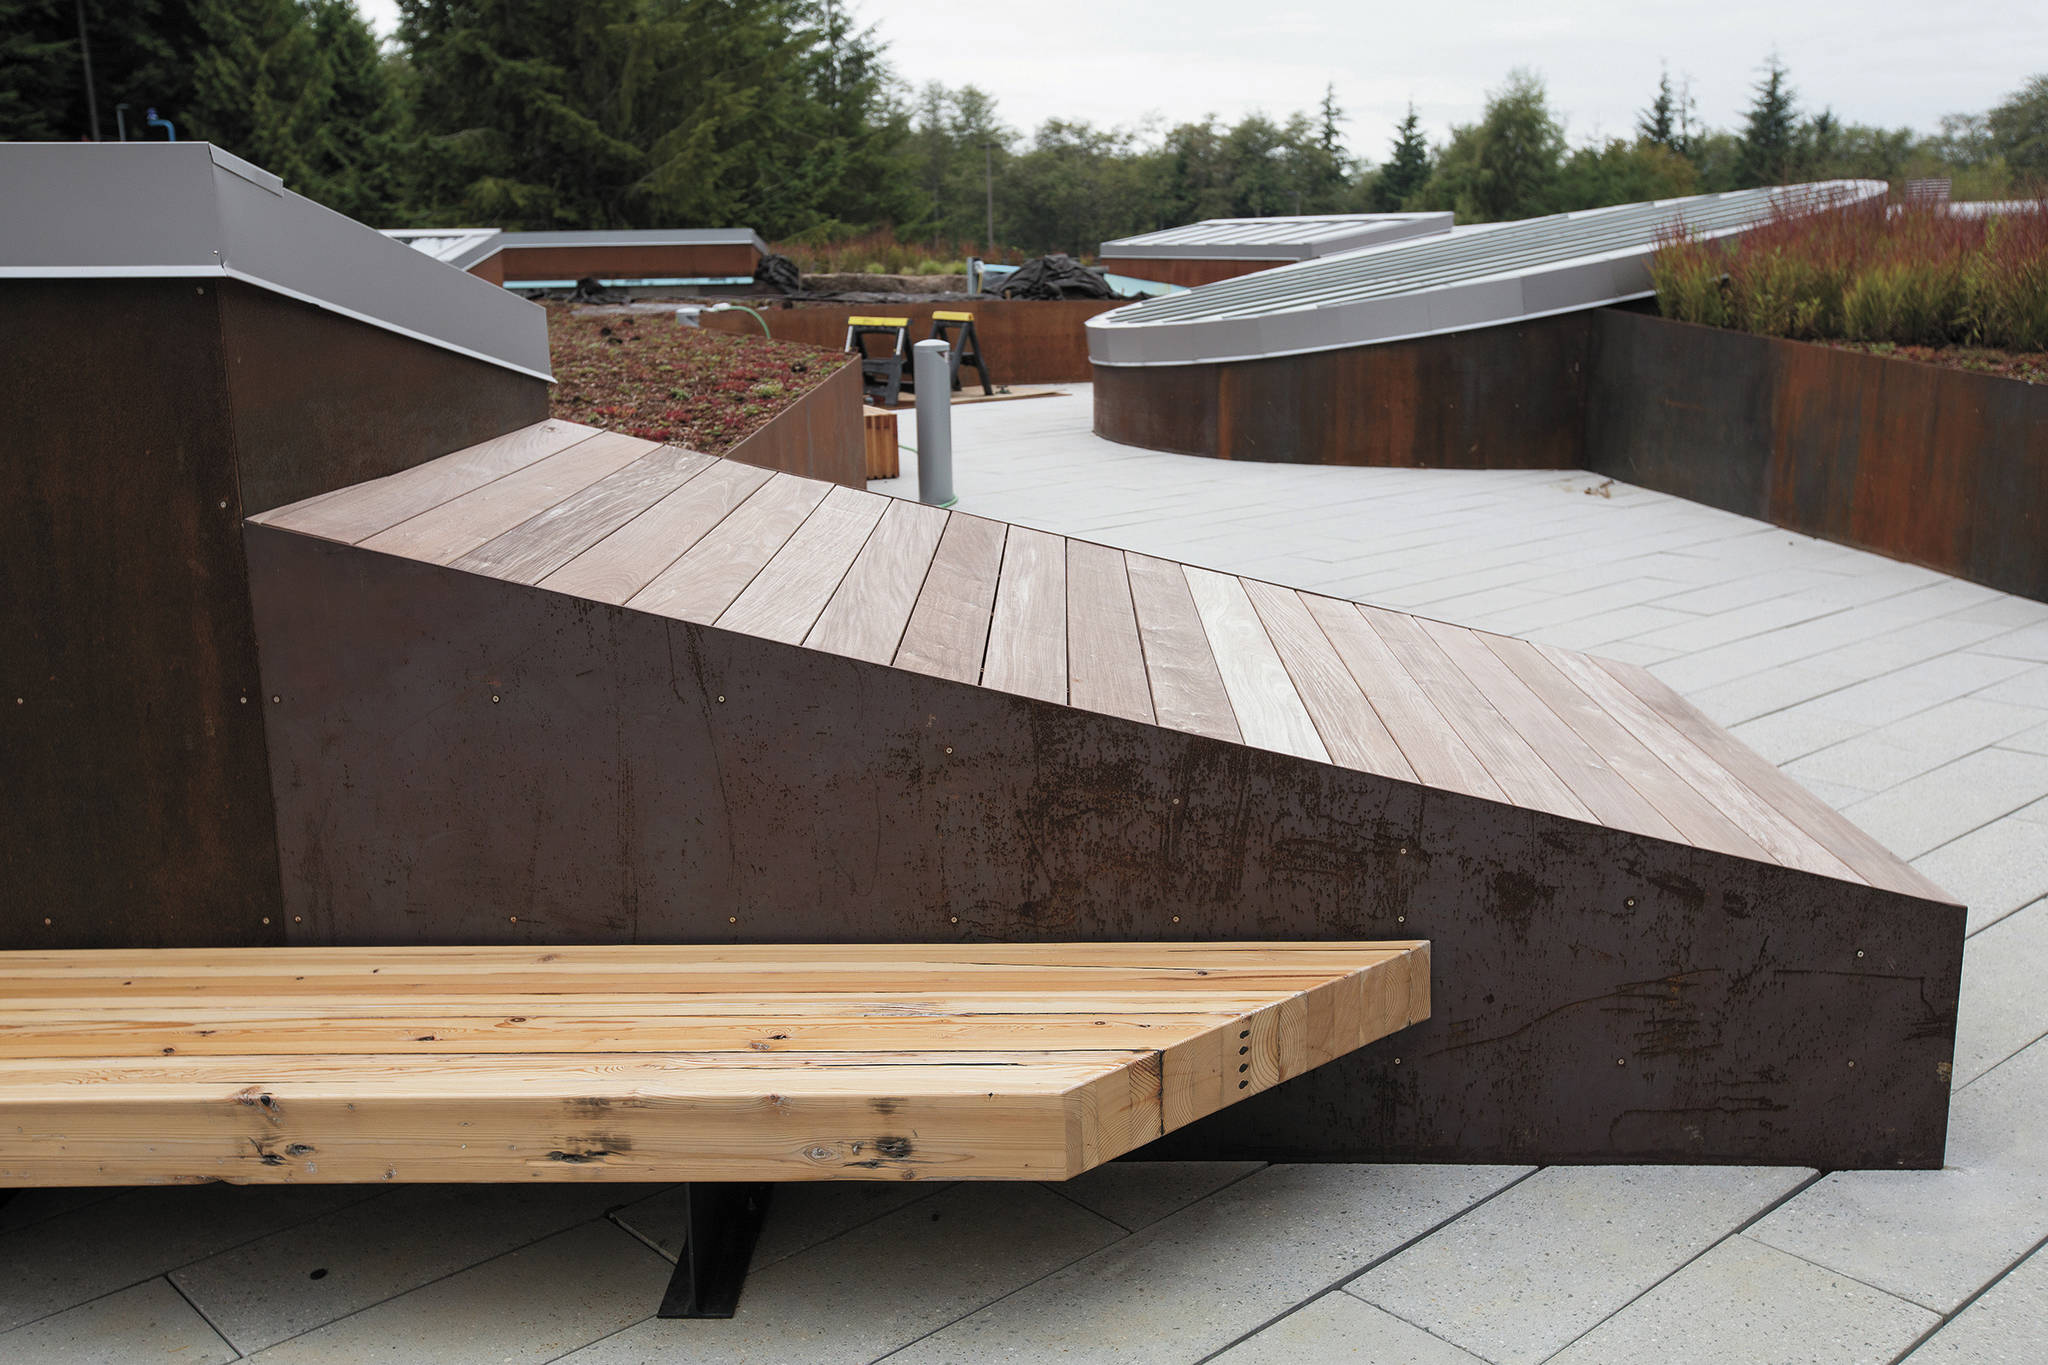 The Daily World file | Outside the Schermer Building on the Grays Harbor College campus. The school is preparing to offer classes remotely for spring quarter. The “podium” at the new Schermer Building features a green roof.